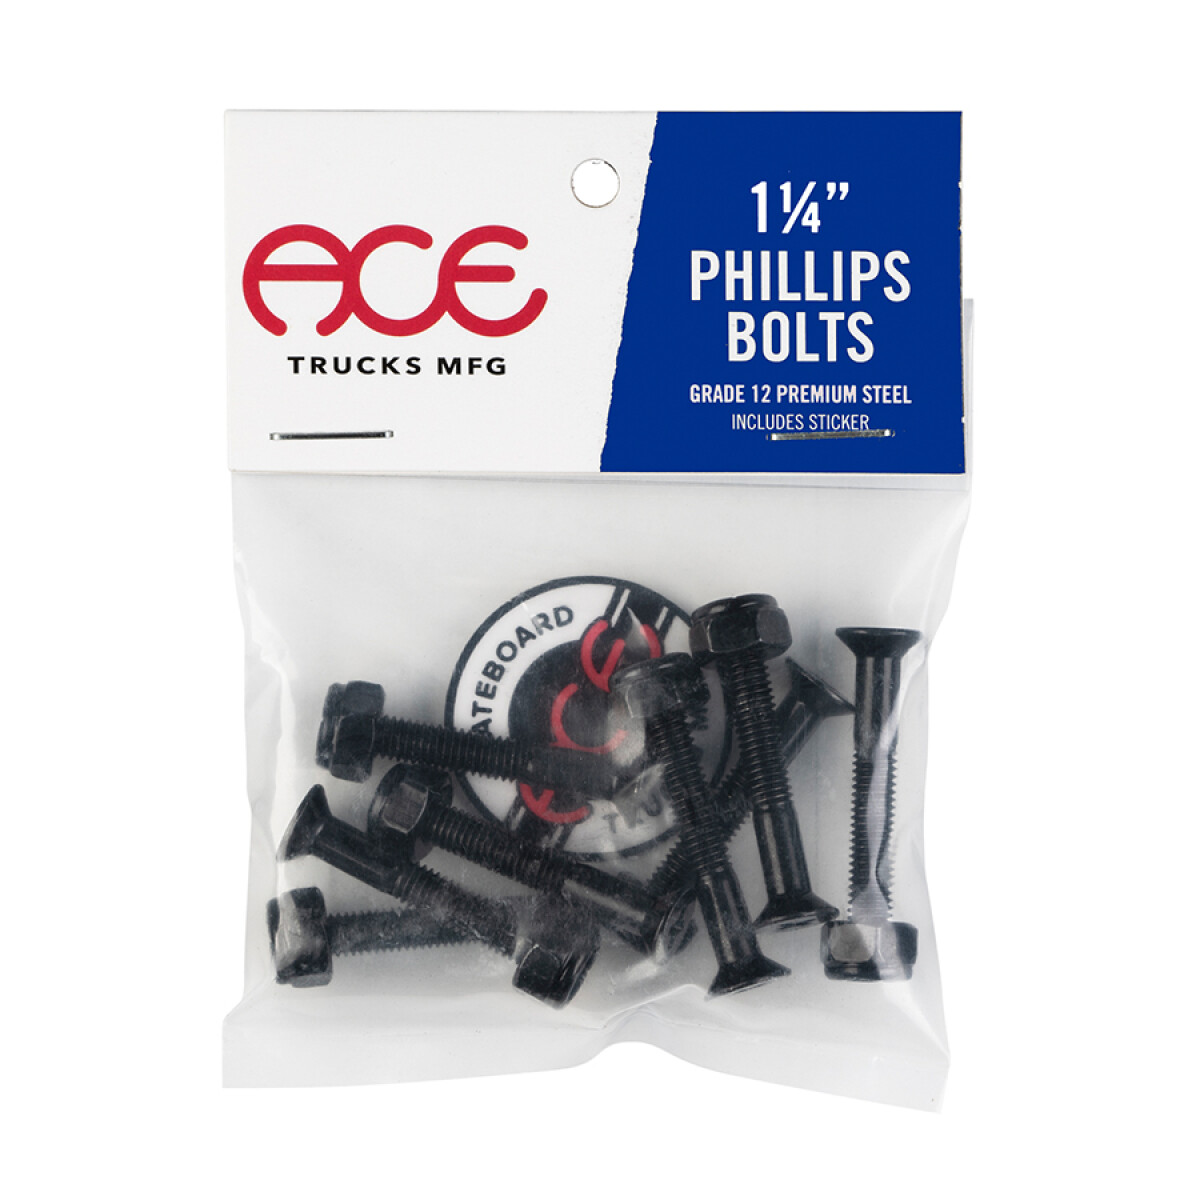 Tornillos Ace Phillips 1 1/4" 